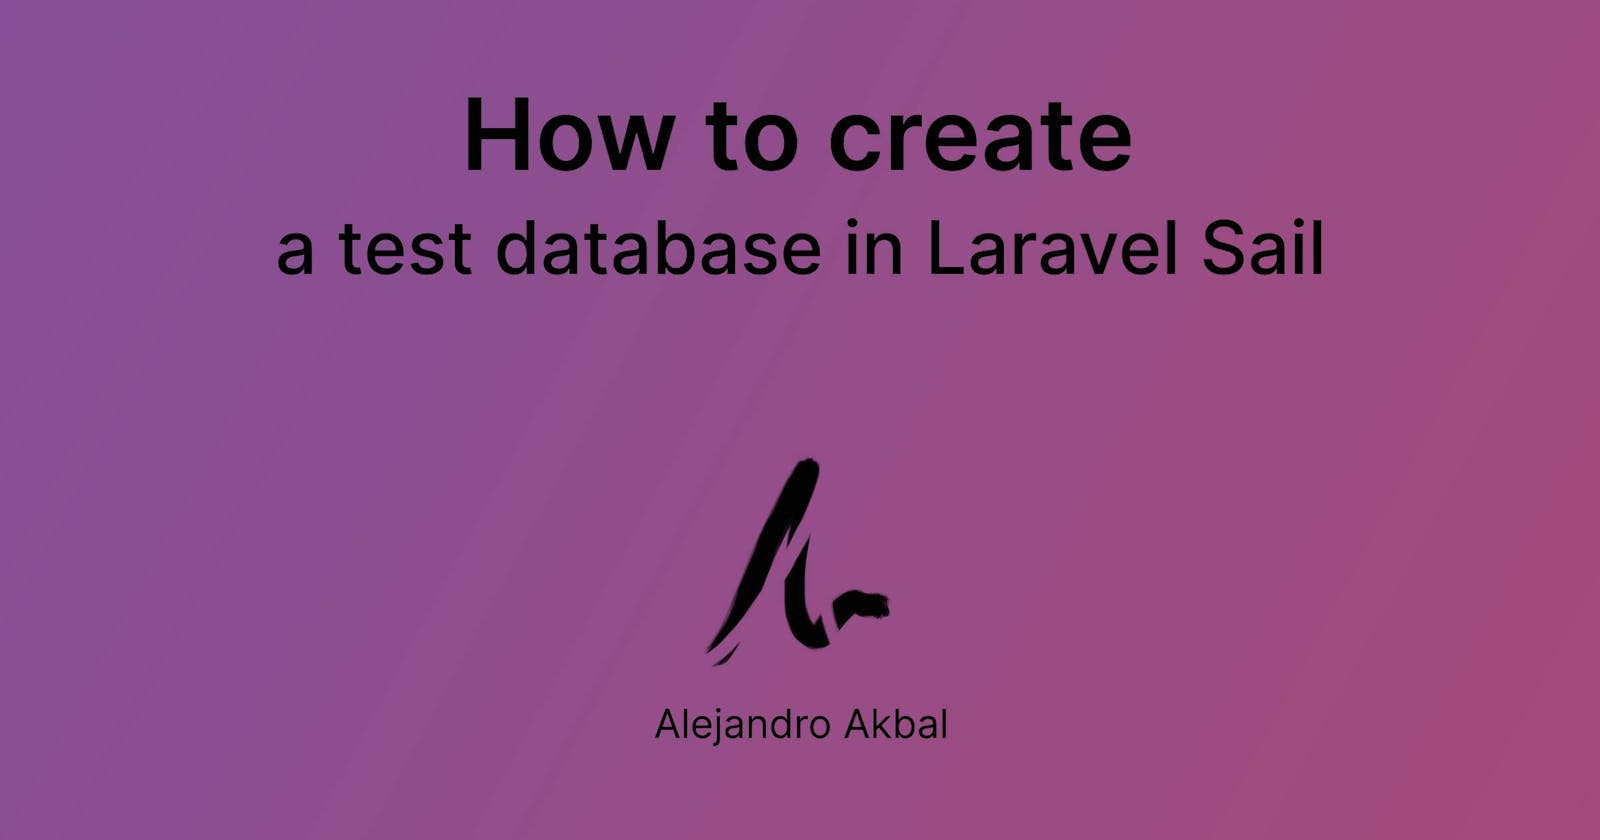 How to create a test database with Laravel Sail